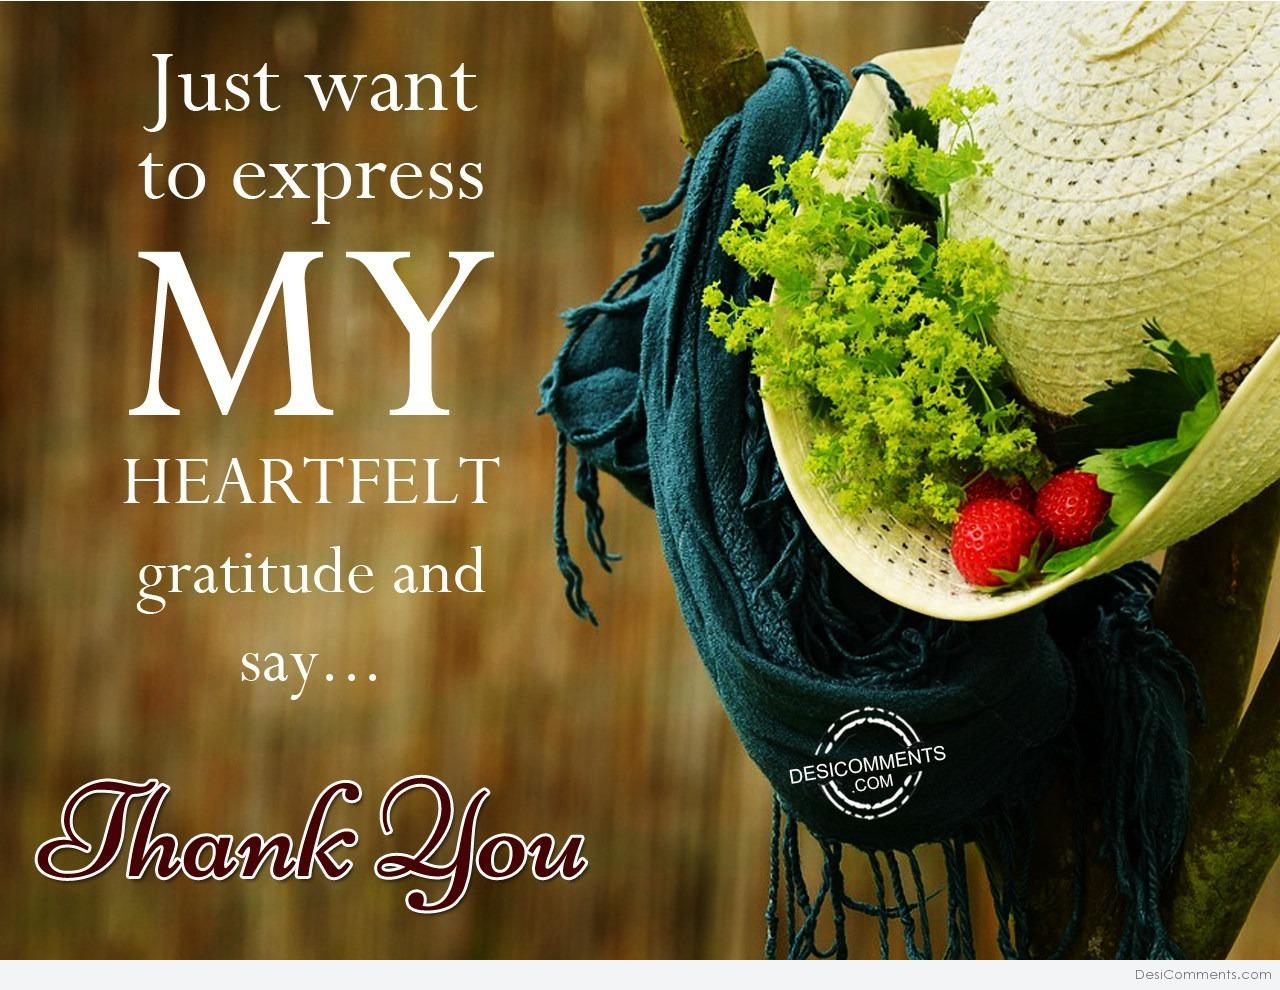 Just want to express my heartfelt gratitude and say… - DesiComments.com